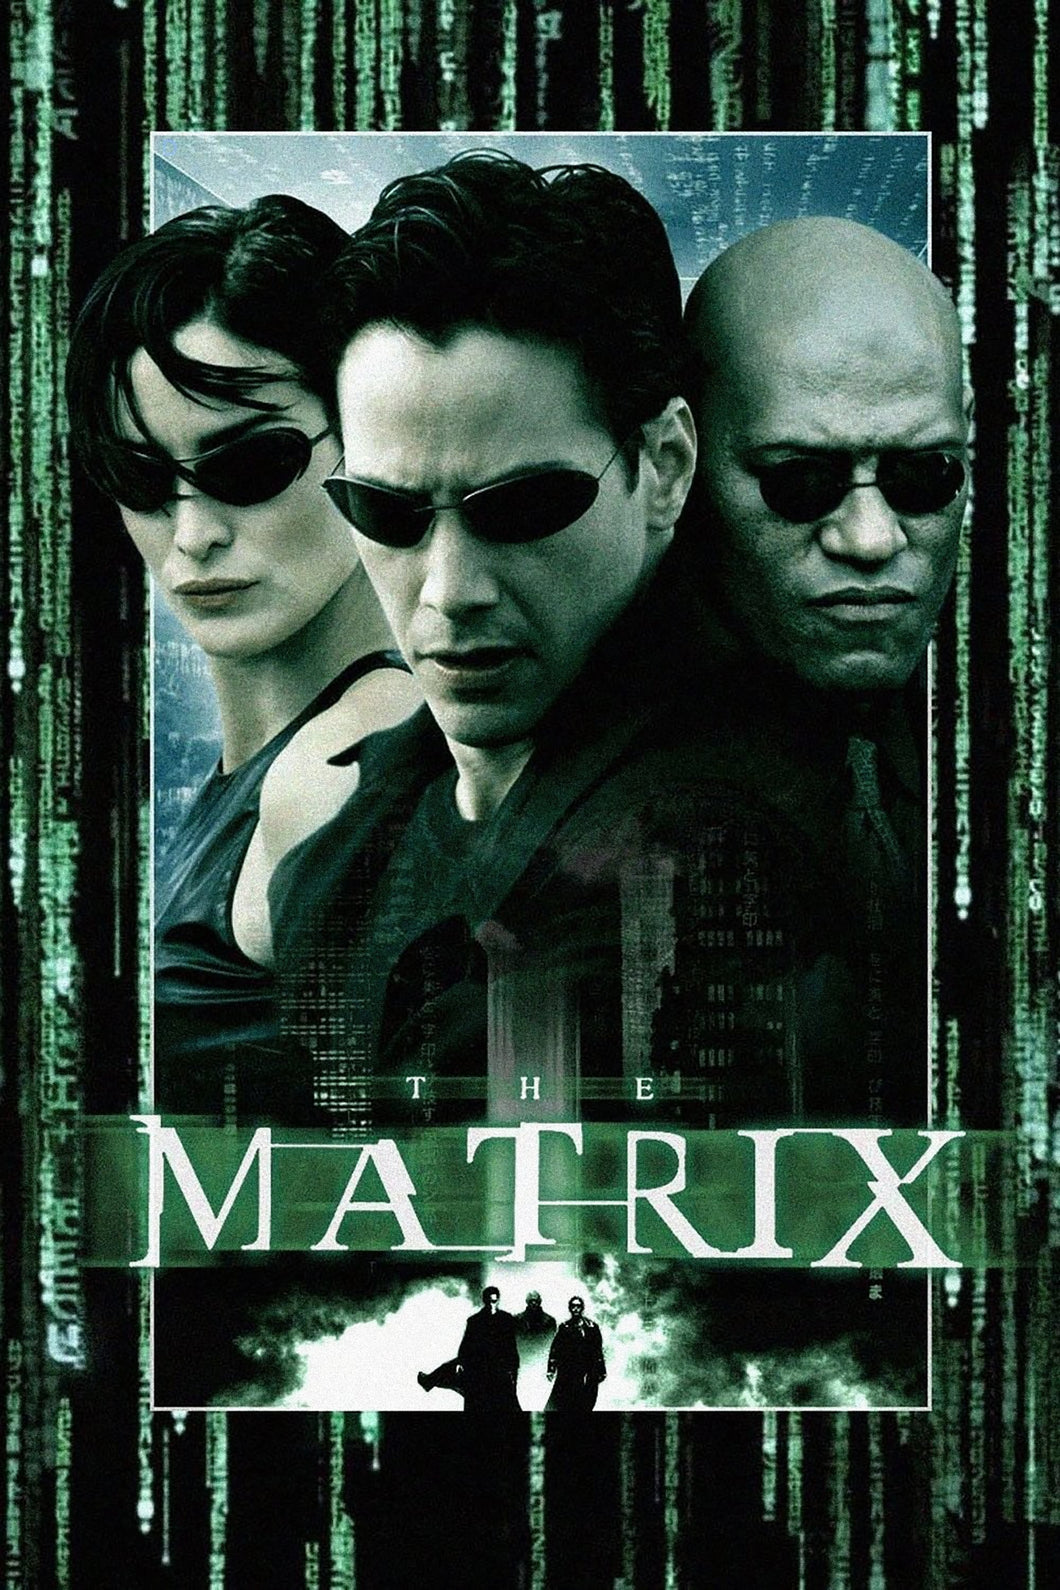 The Matrix (1999) Movie Poster Framed or Unframed Glossy Poster Free UK Shipping!!!